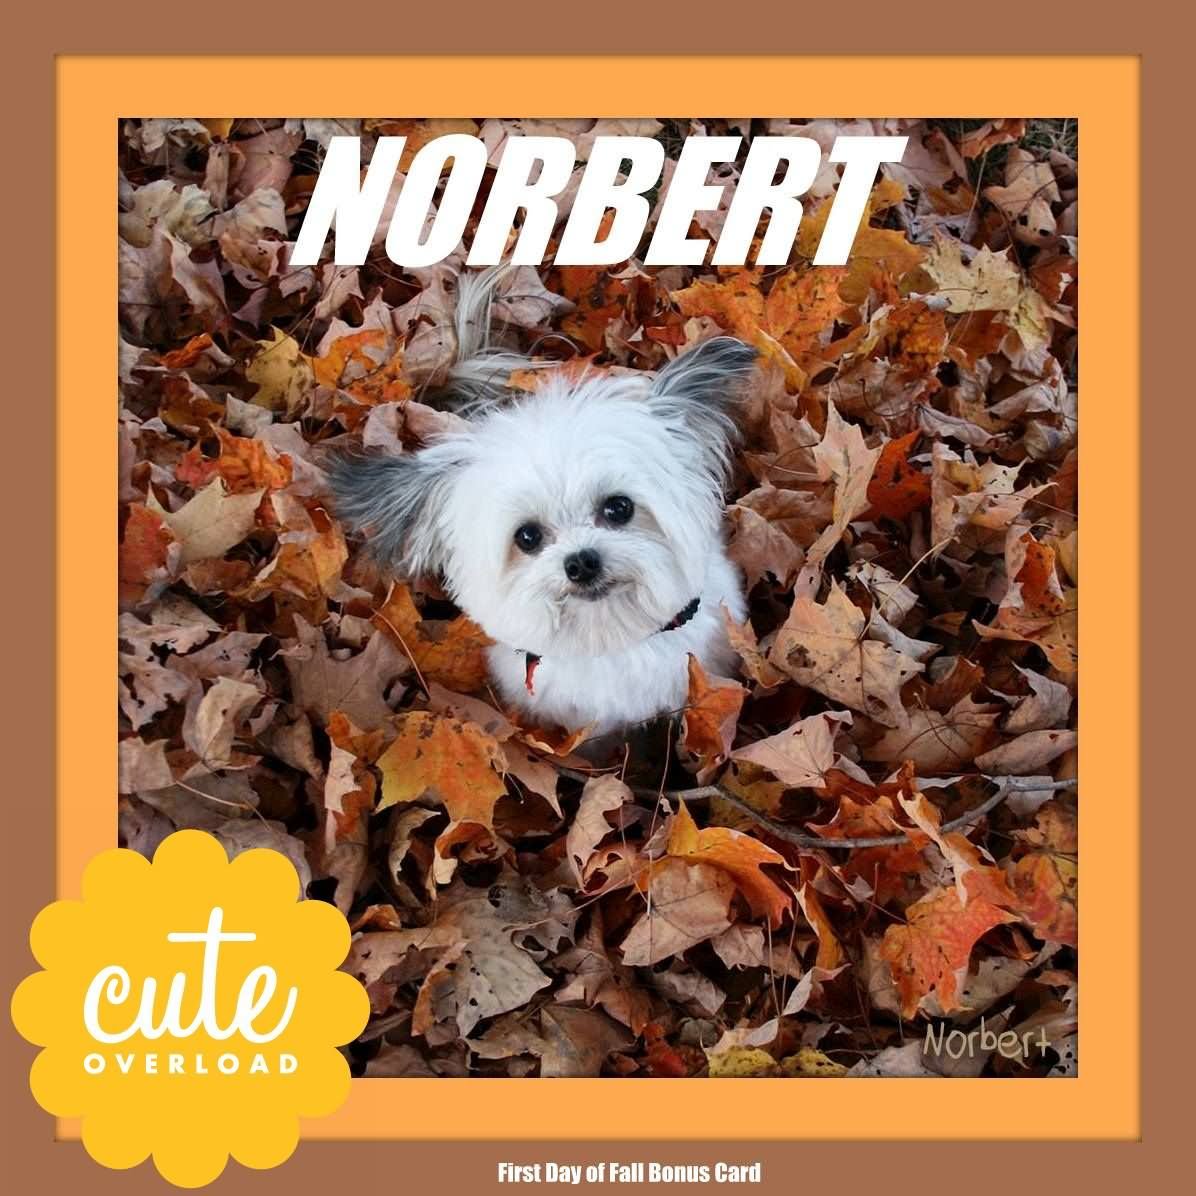 Cute Little Puppy Sitting On Fallen Leaves Happy First Day of Fall Greeting Card Image